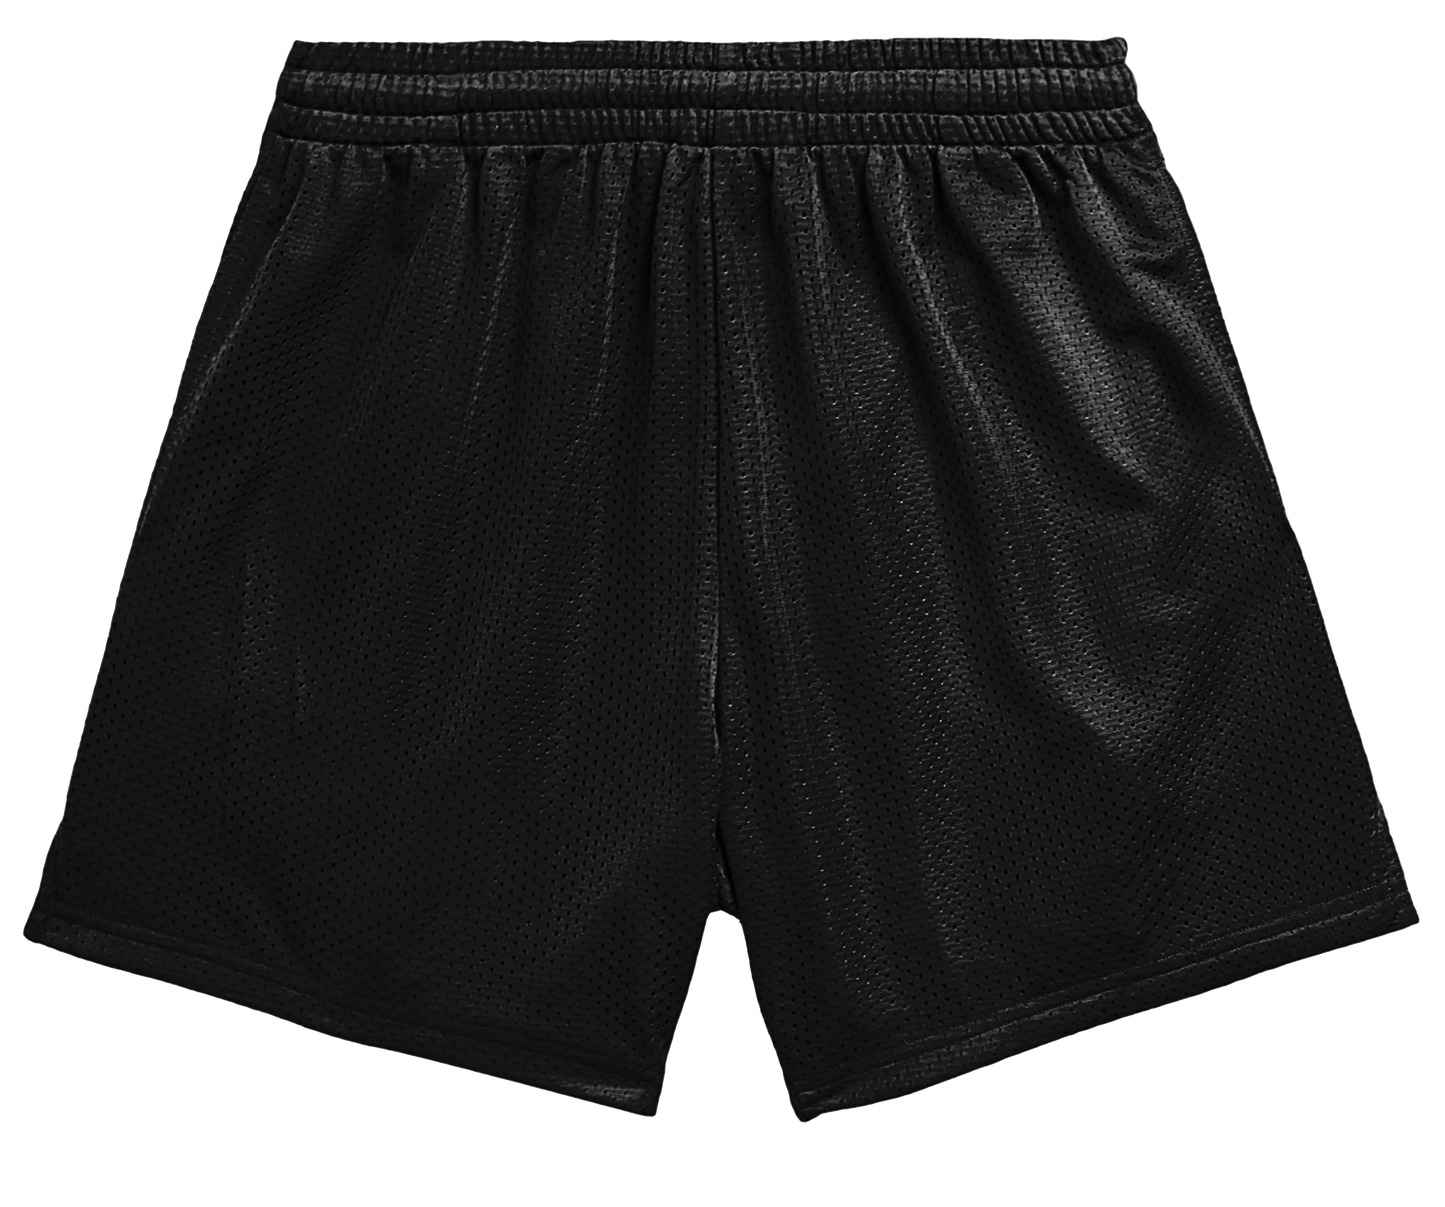 KING OF KINGS & LORD OF LORDS (BLACK) - PREMIUM MESH SHORTS